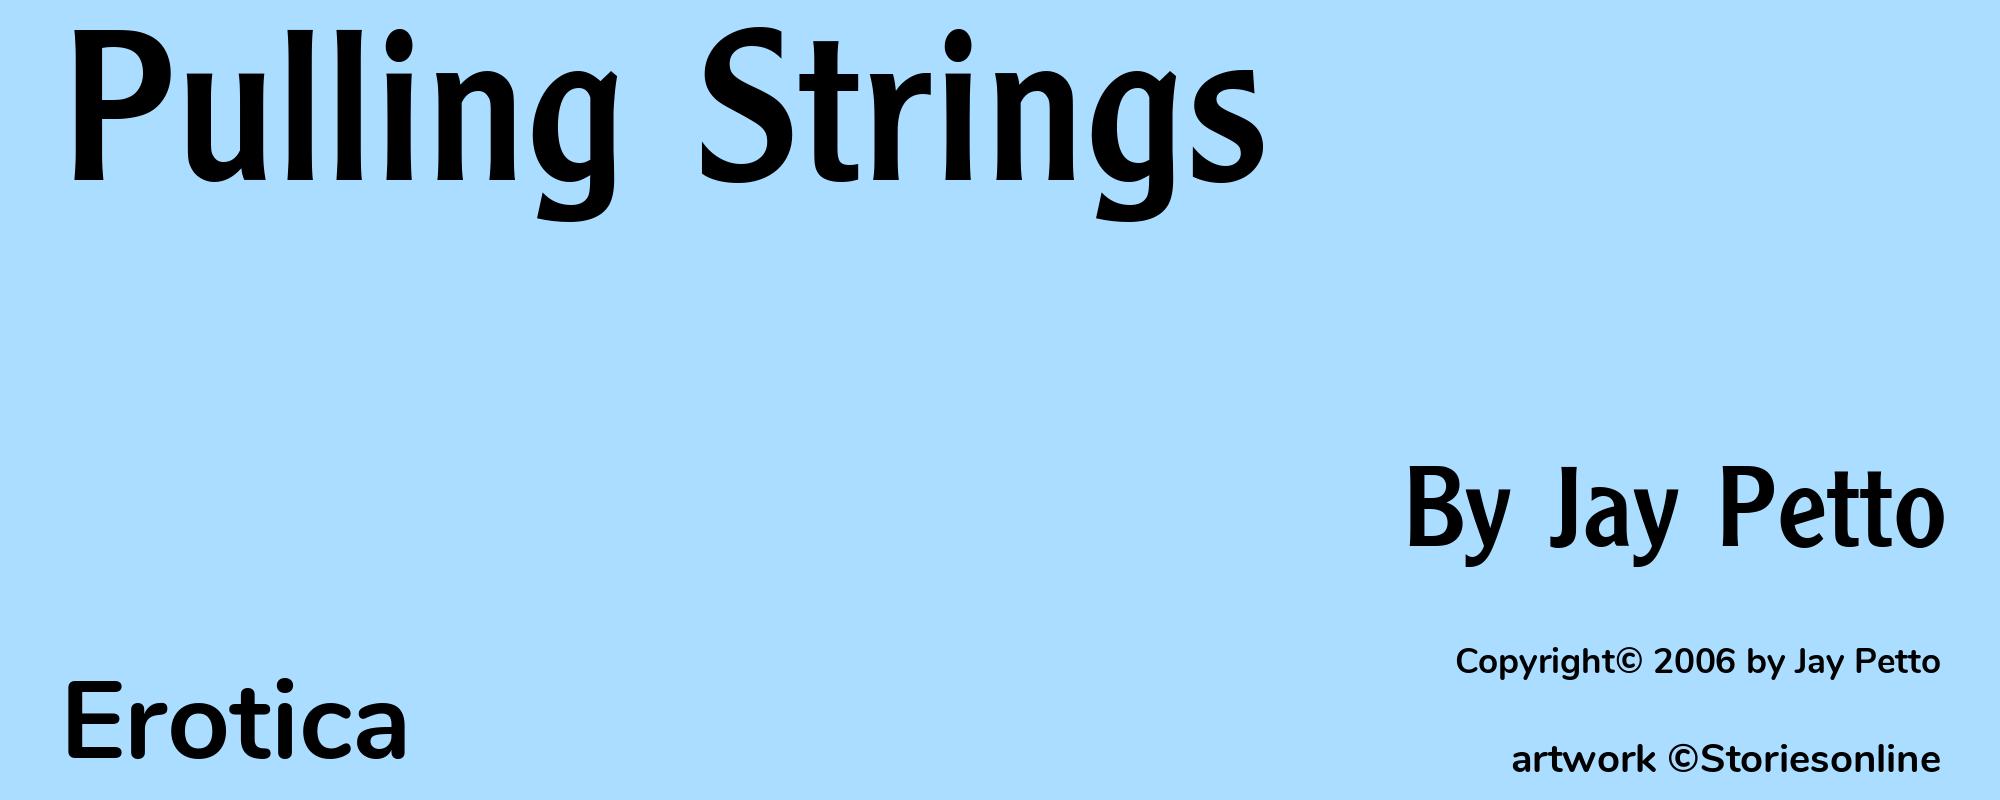 Pulling Strings - Cover